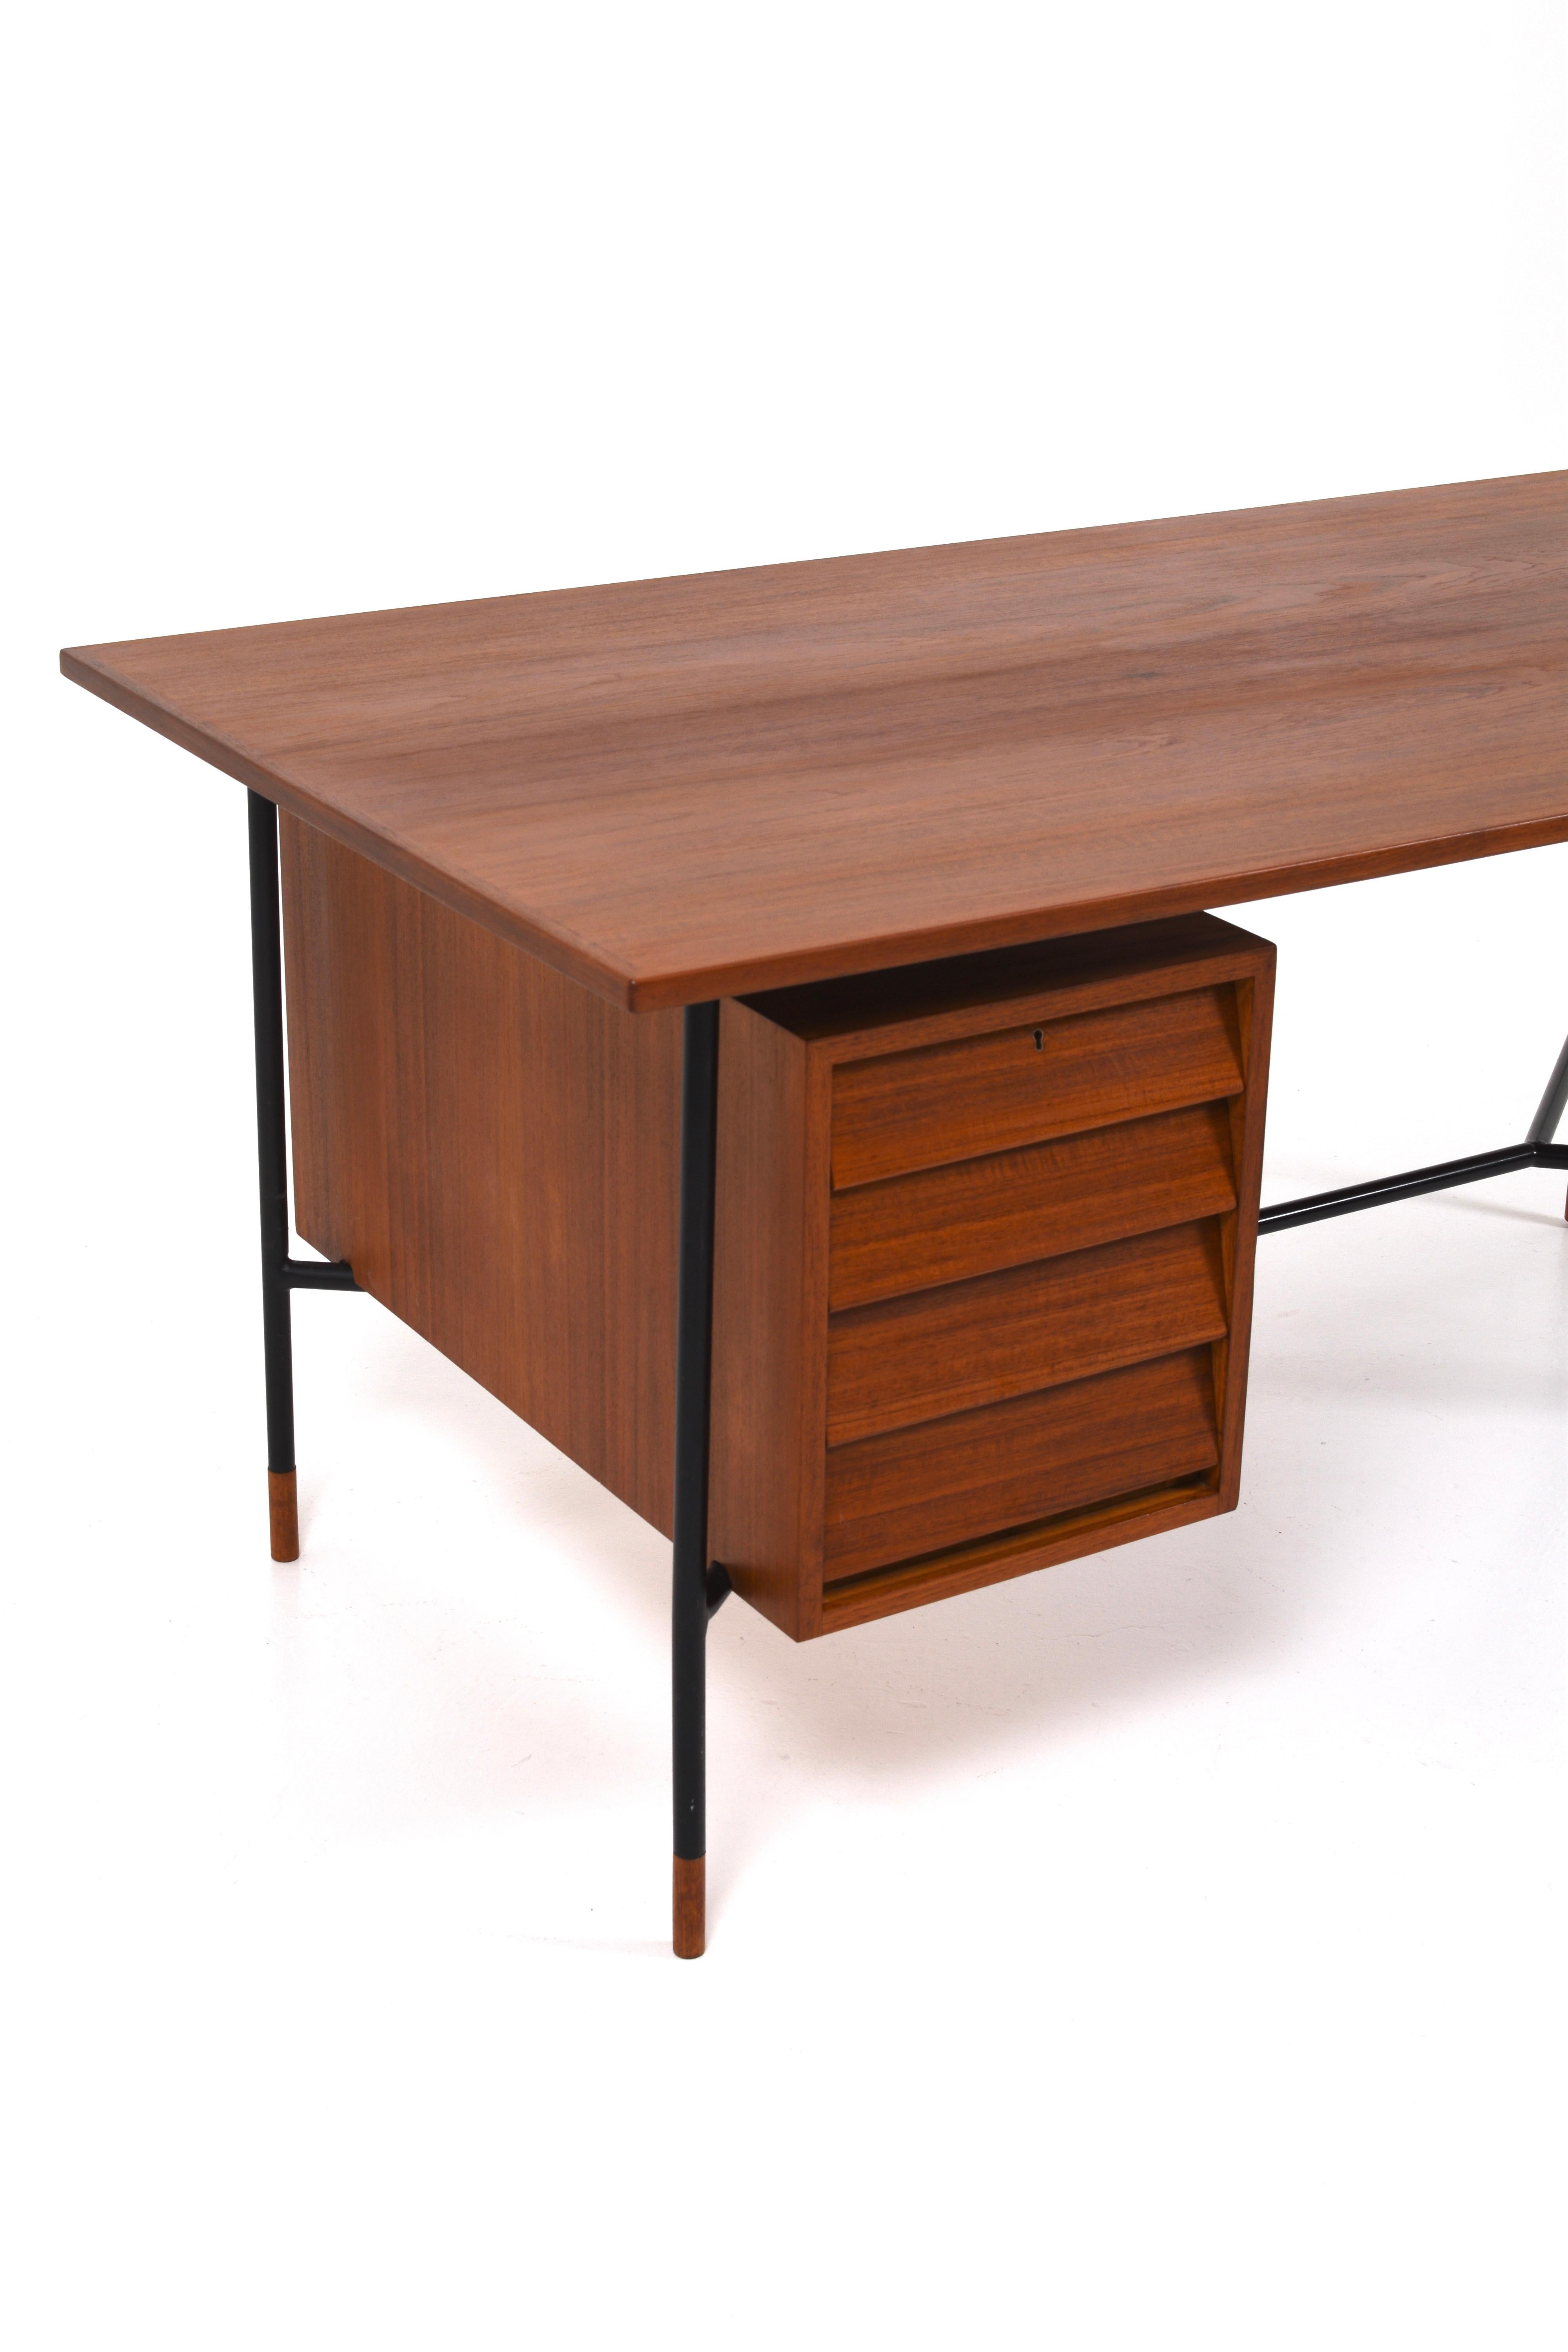 Swedish Rare Desk H-55 by Åke Hassbjer in teak and steel base, 1950s For Sale